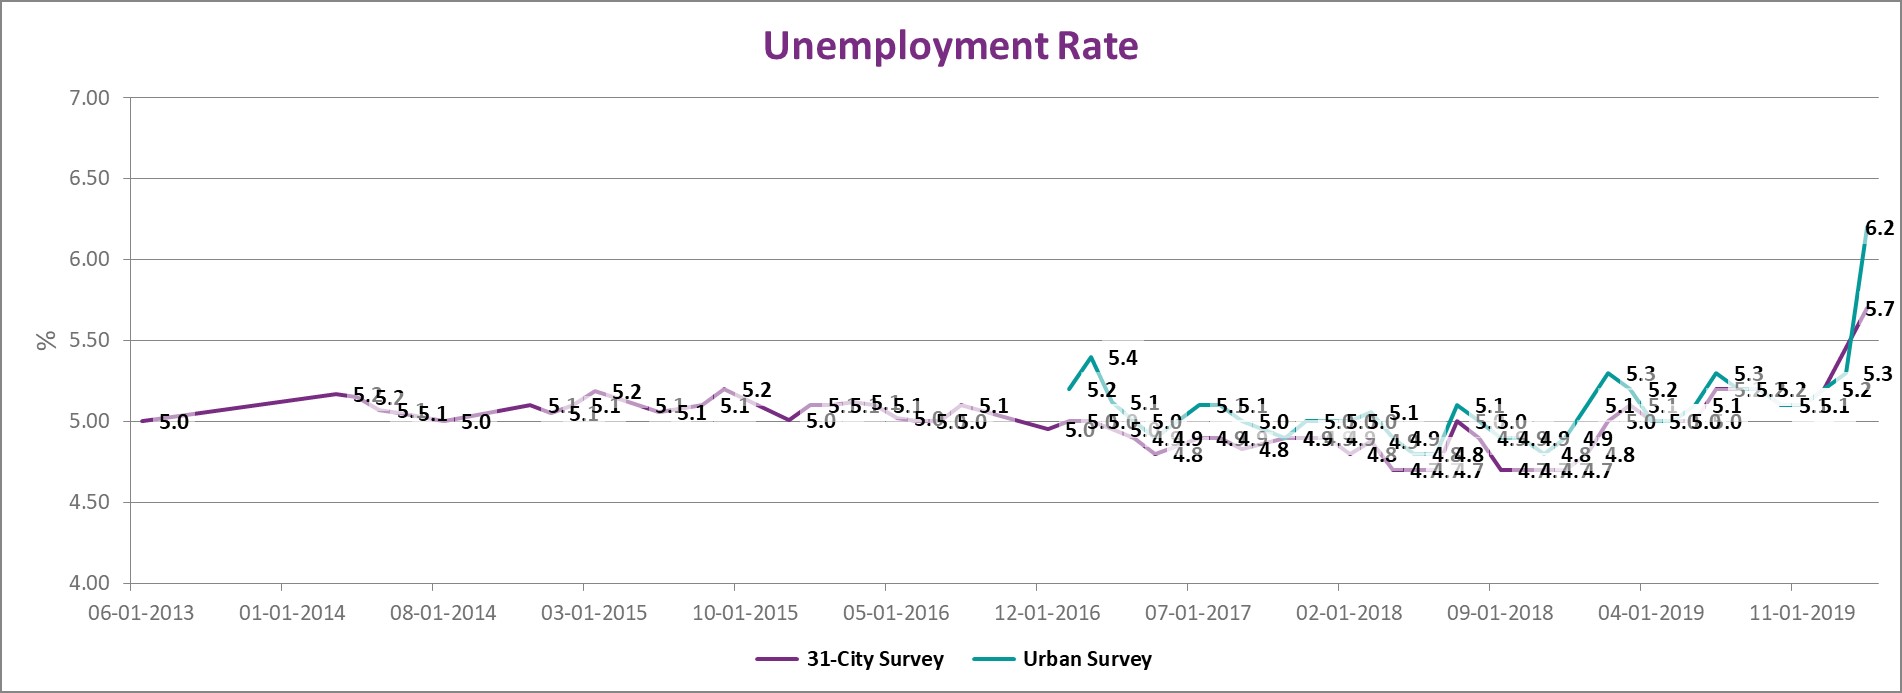 China's unemployment rate from June 2013 to January 2020